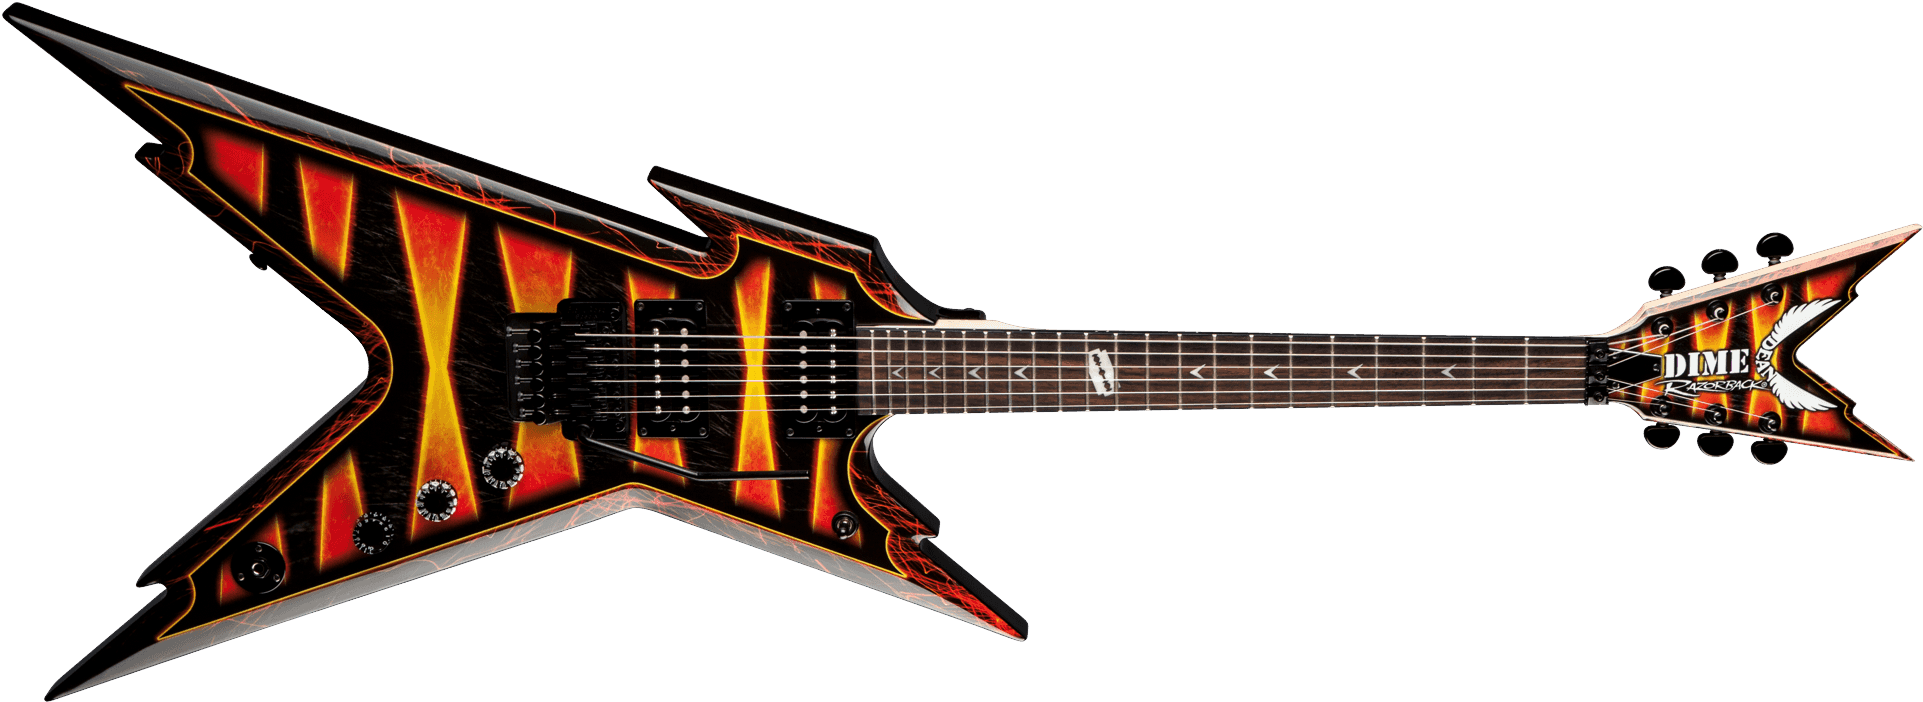 Firefly Guitar - Dean Dime Razorback Bumblebee (2000x784), Png Download